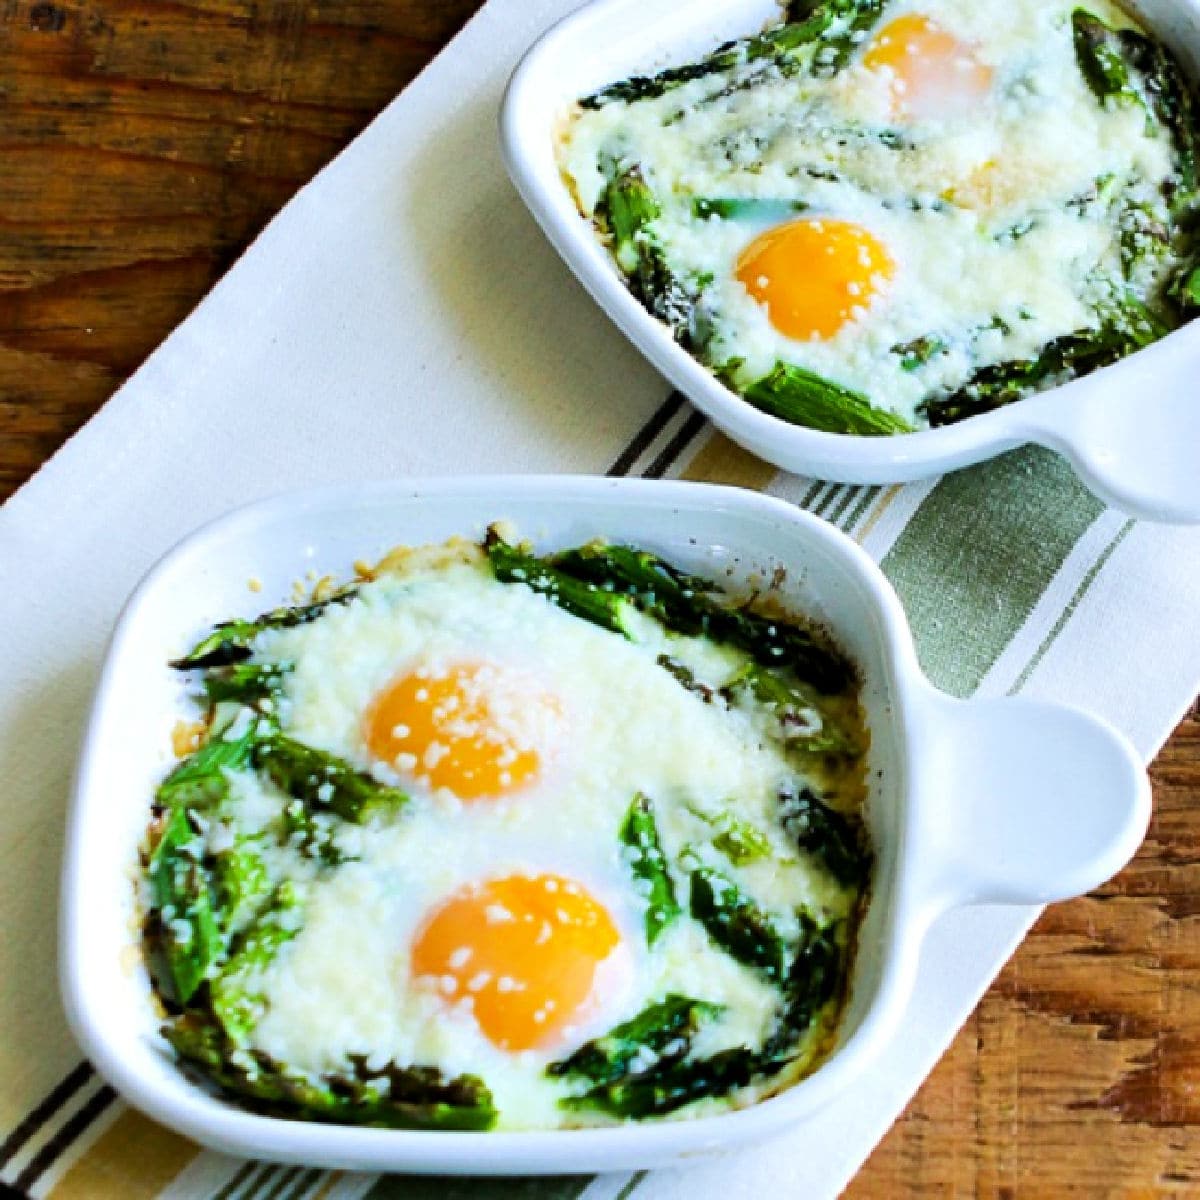 Square image for Baked Eggs and Asparagus with Parmesan shown in two gratin dishes.